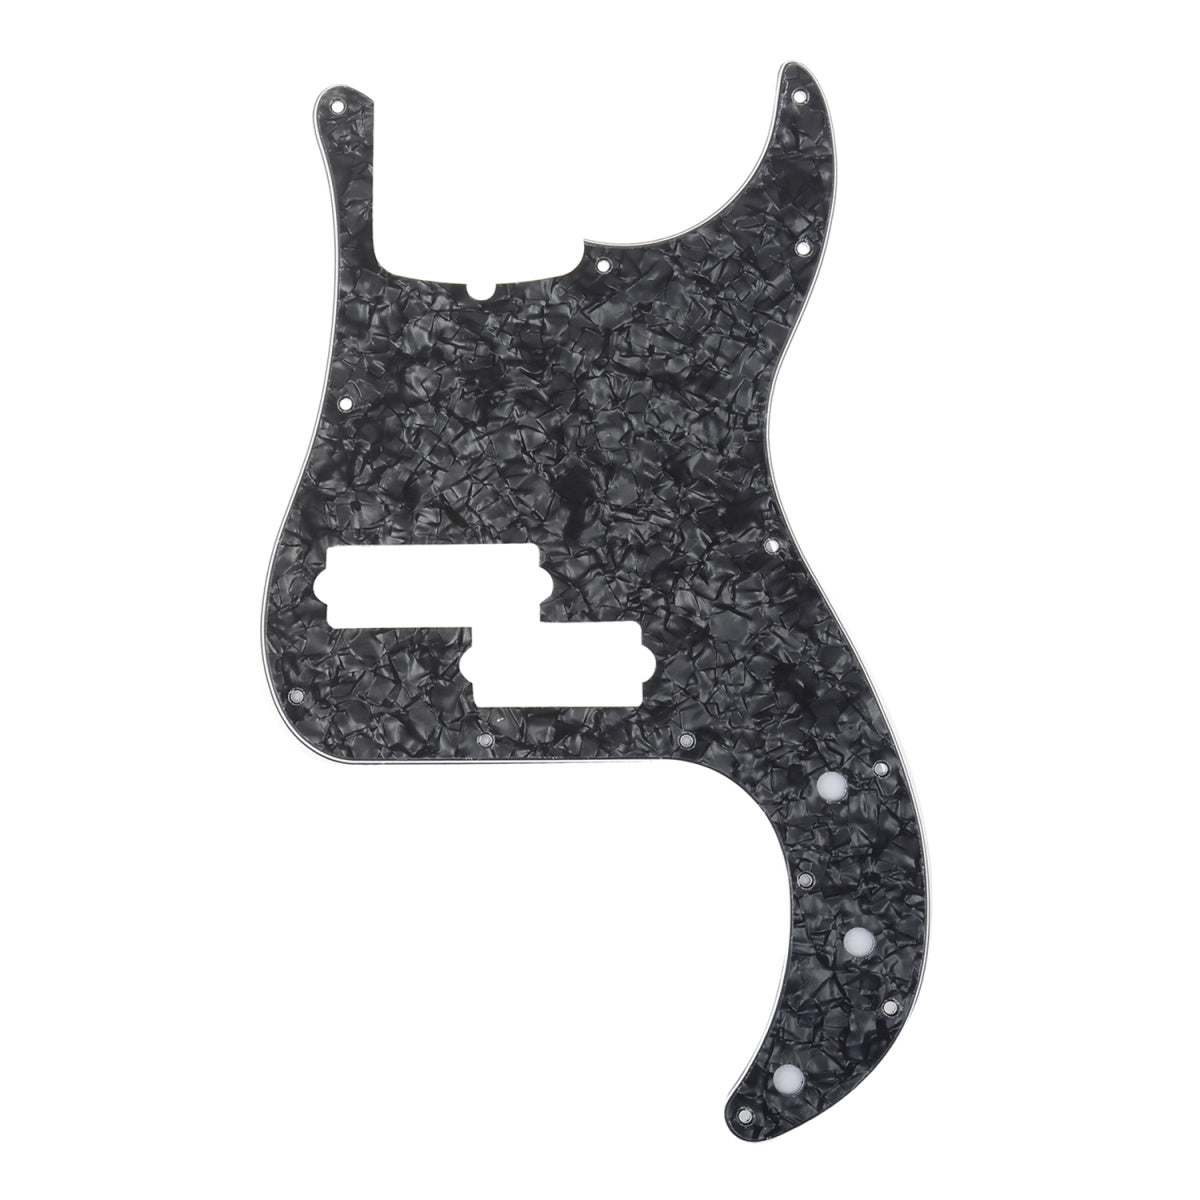 Musiclily Pro 13-Hole Contemporary P Bass Pickguard for Fender Precision Bass American 5-String, 4Ply Black Pearl